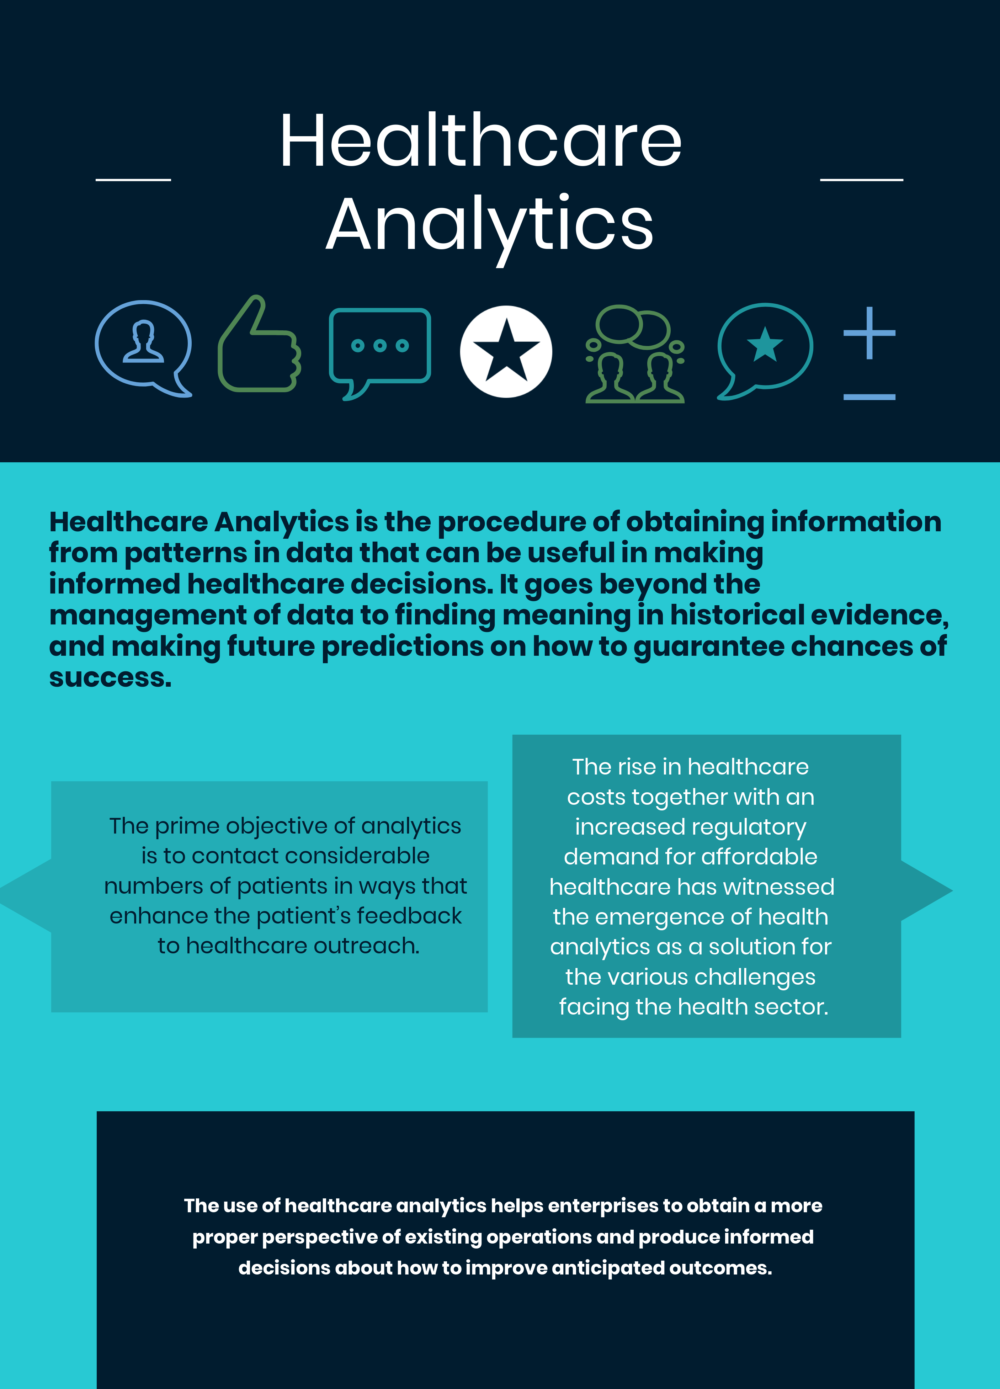 How to Select the Best Healthcare Analytics for Your Business